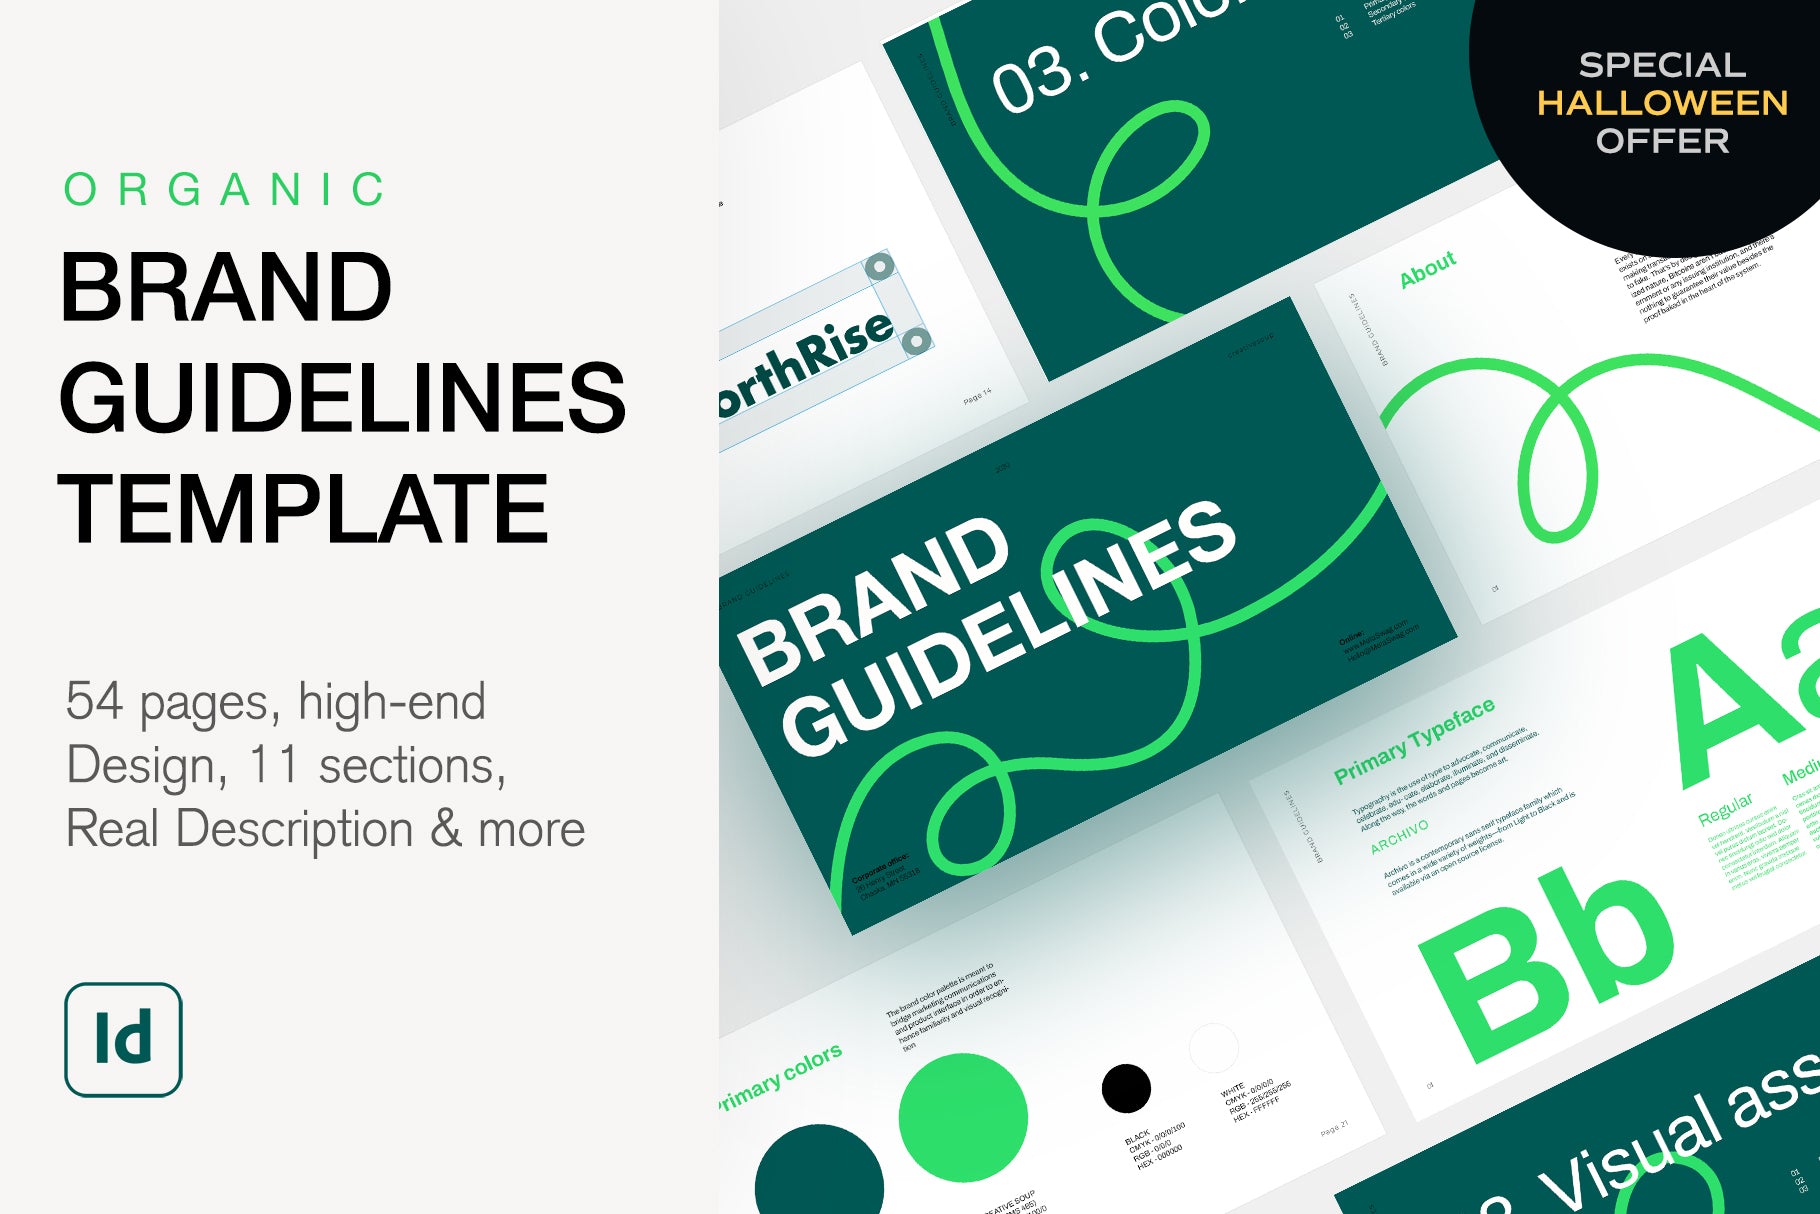 ORGANIC | Brand Guidelines Template